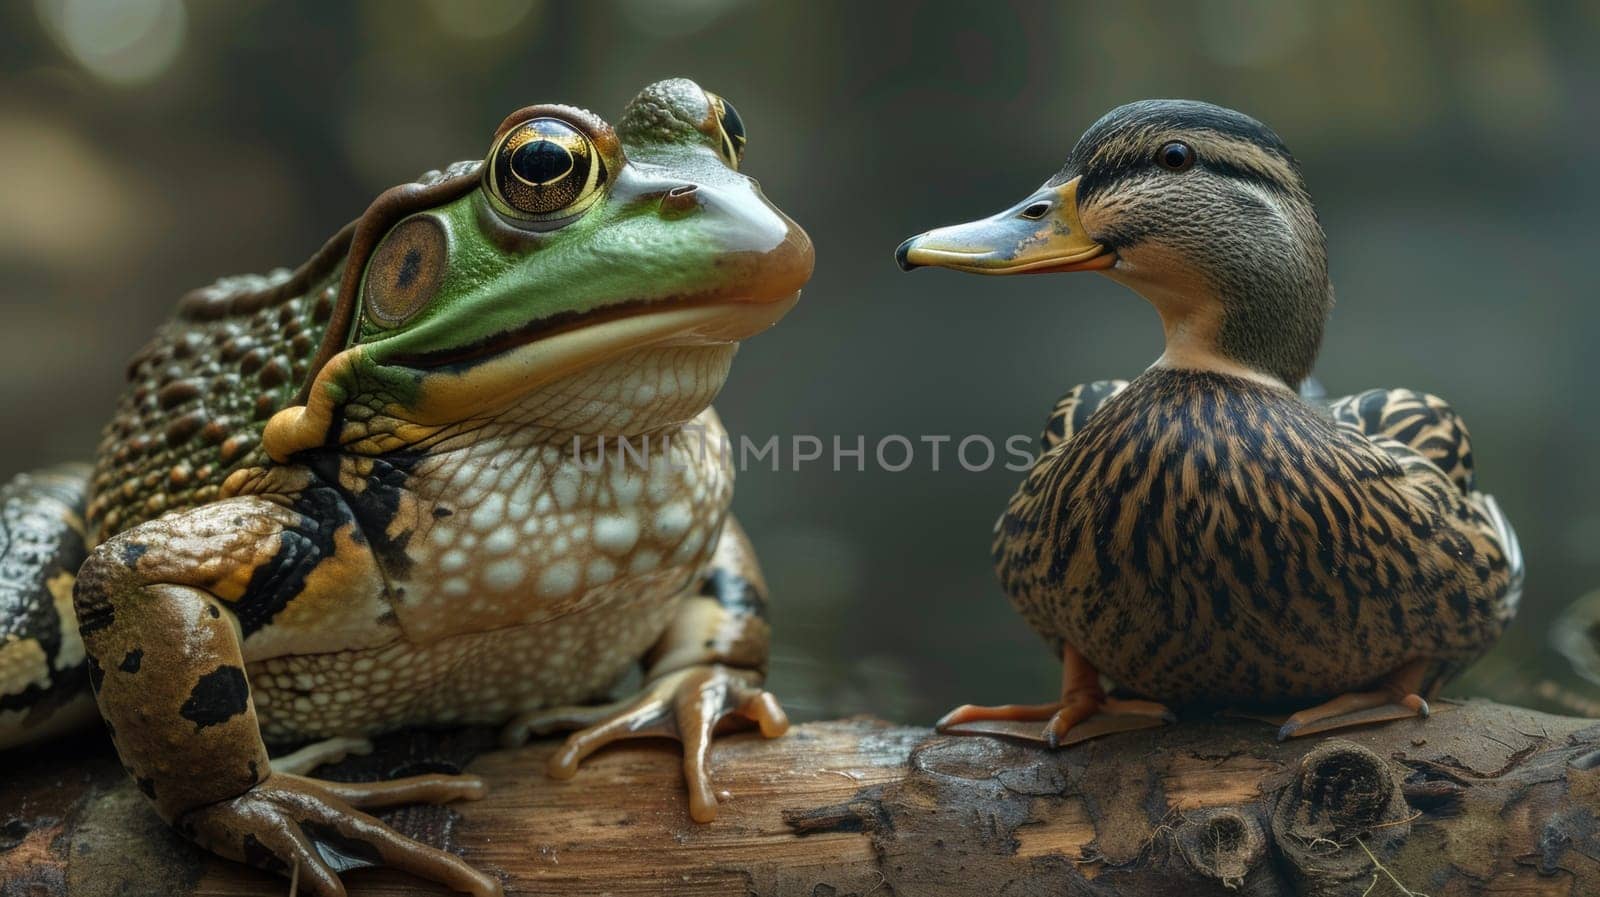 A frog and duck sitting on a log with the frog looking at it